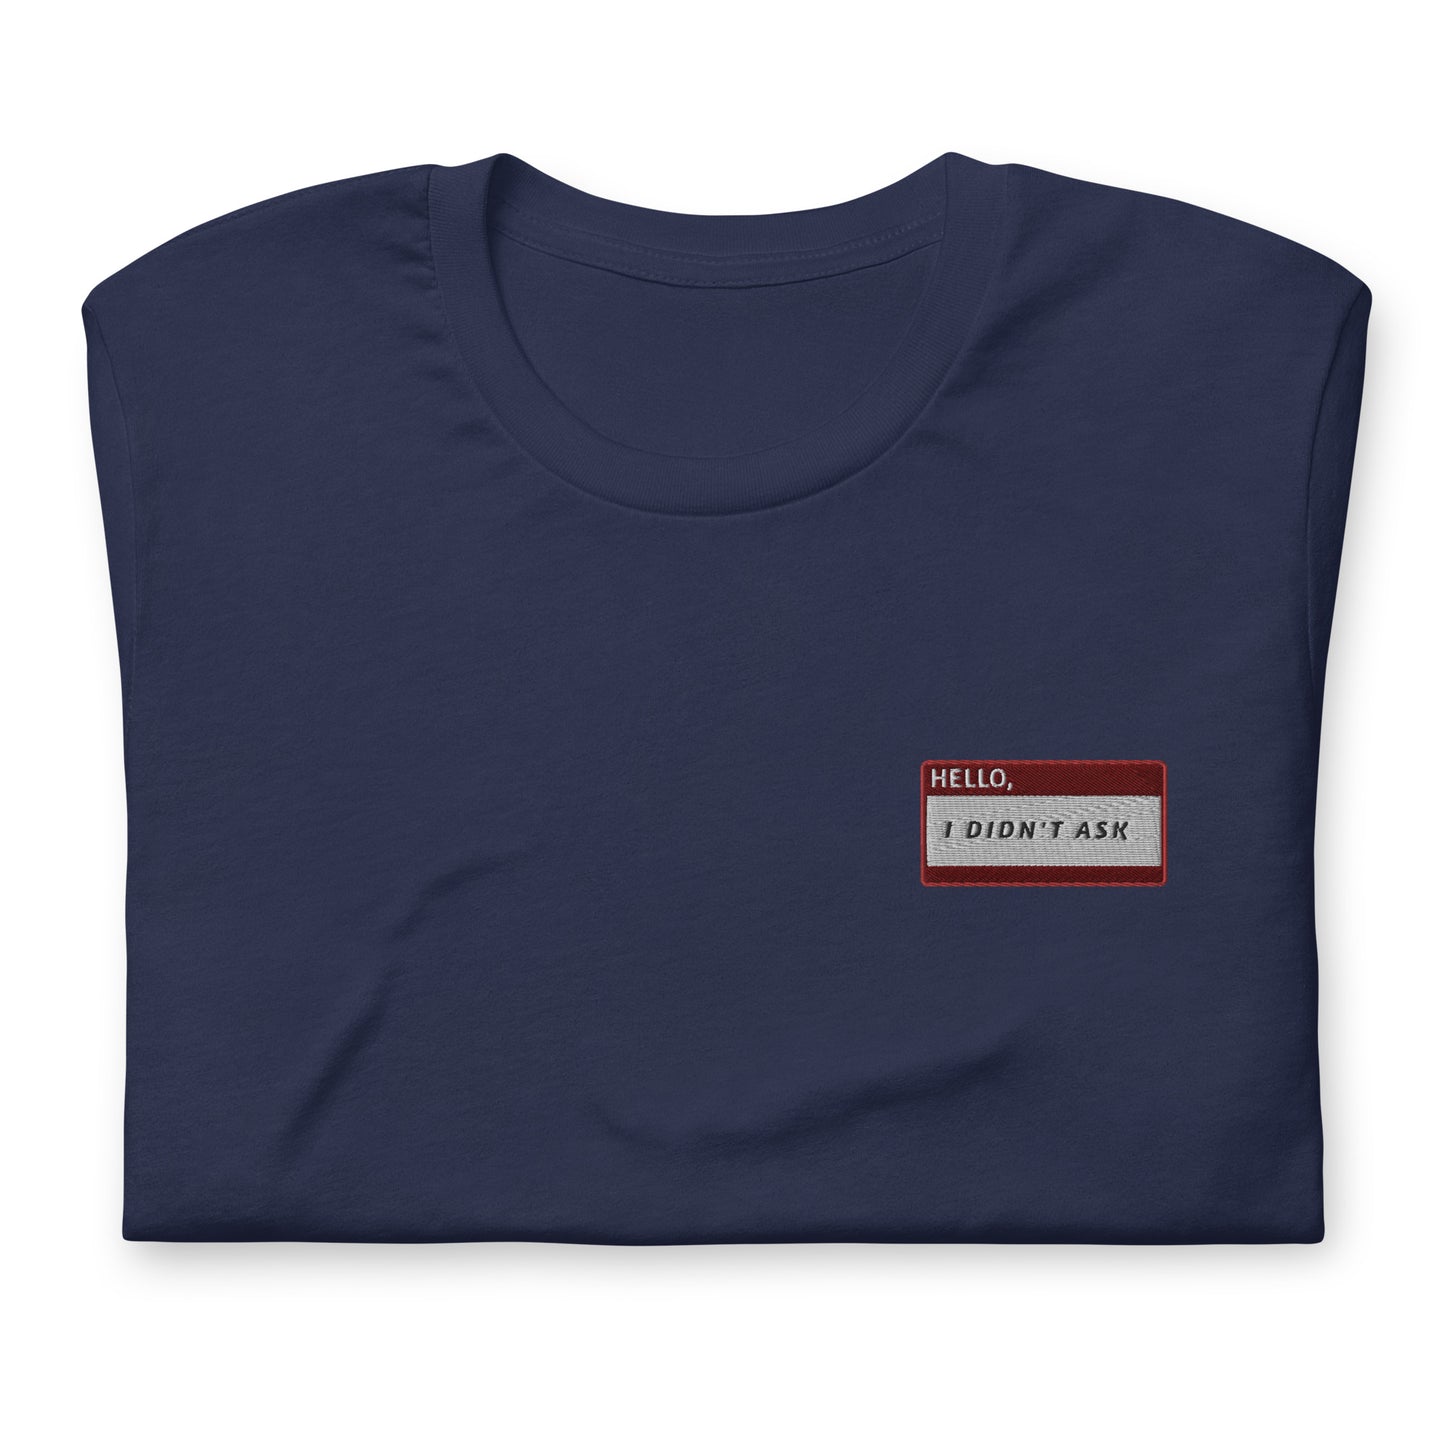 HELLO I DIDN'T ASK - Name Tag T-Shirt